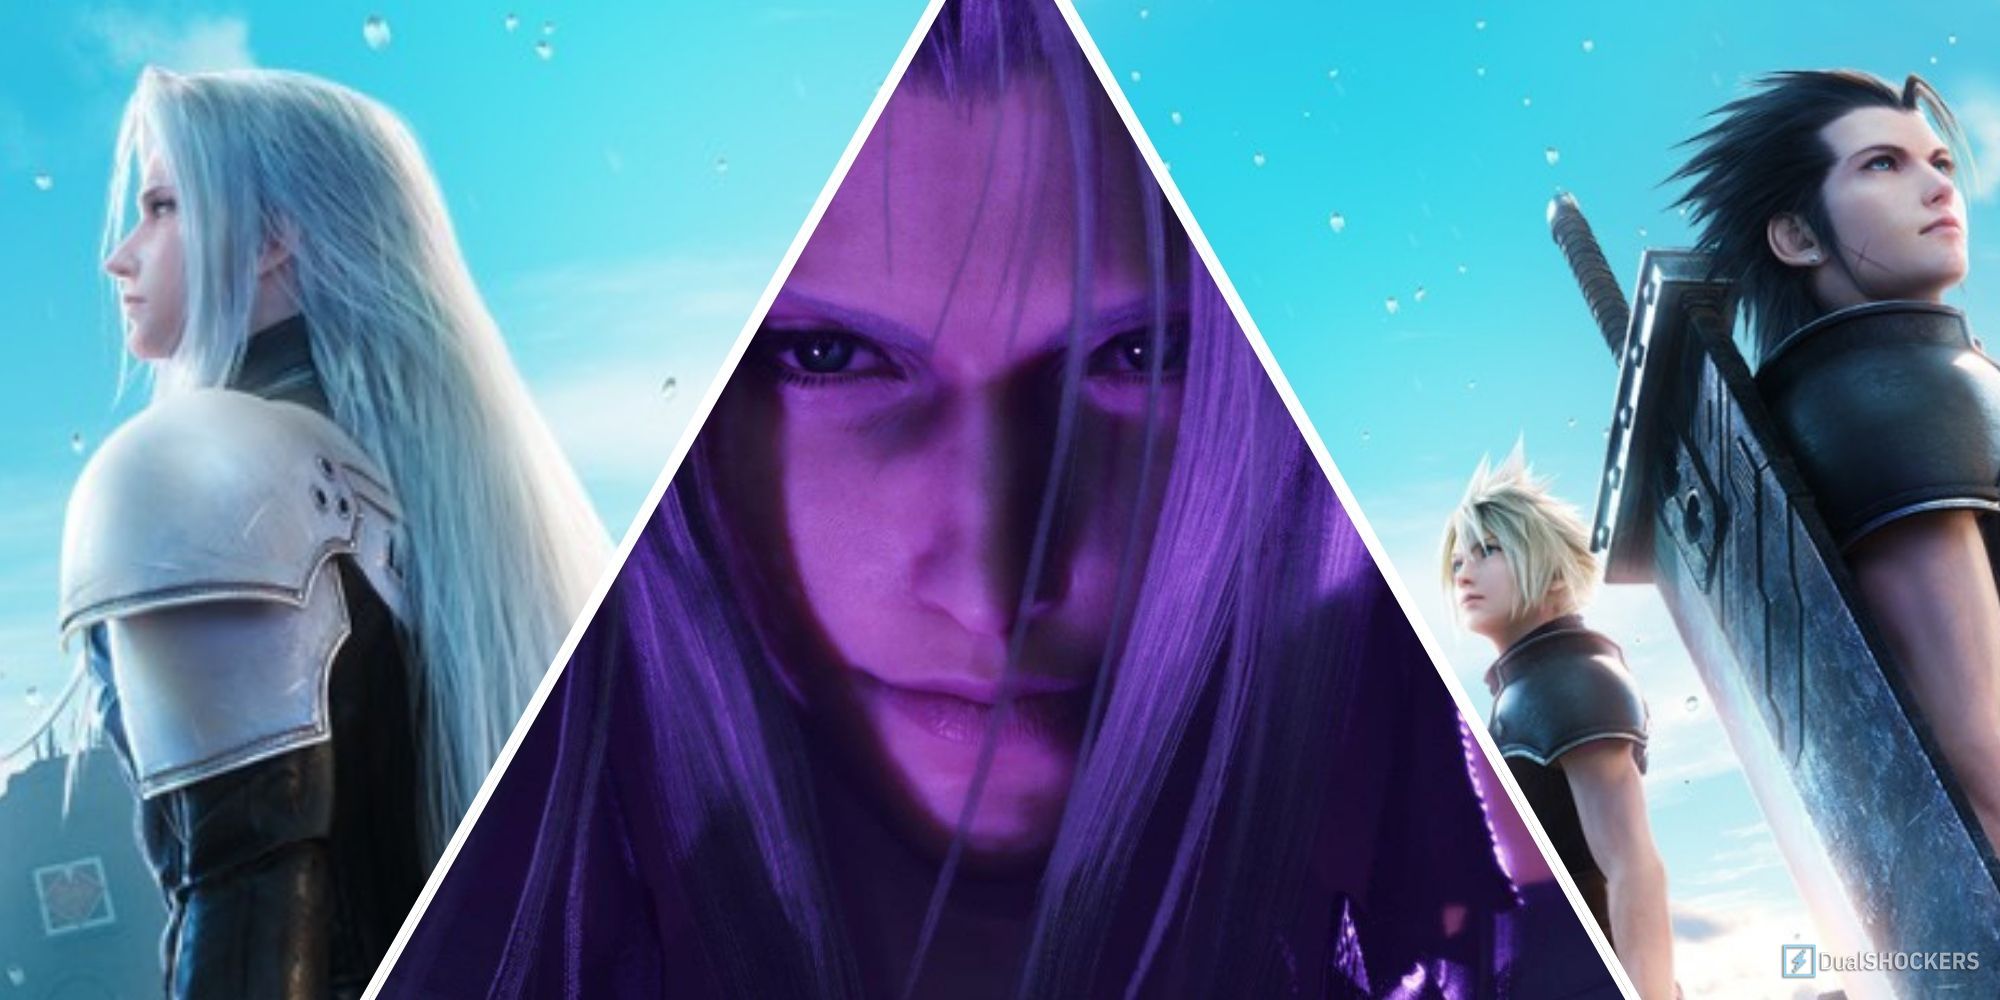 Split image of the Crisis Core Final Fantasy 7 Reunion official image with Cloud, Sephiroth and Zack and another purple image of Sephiroth in the middle.